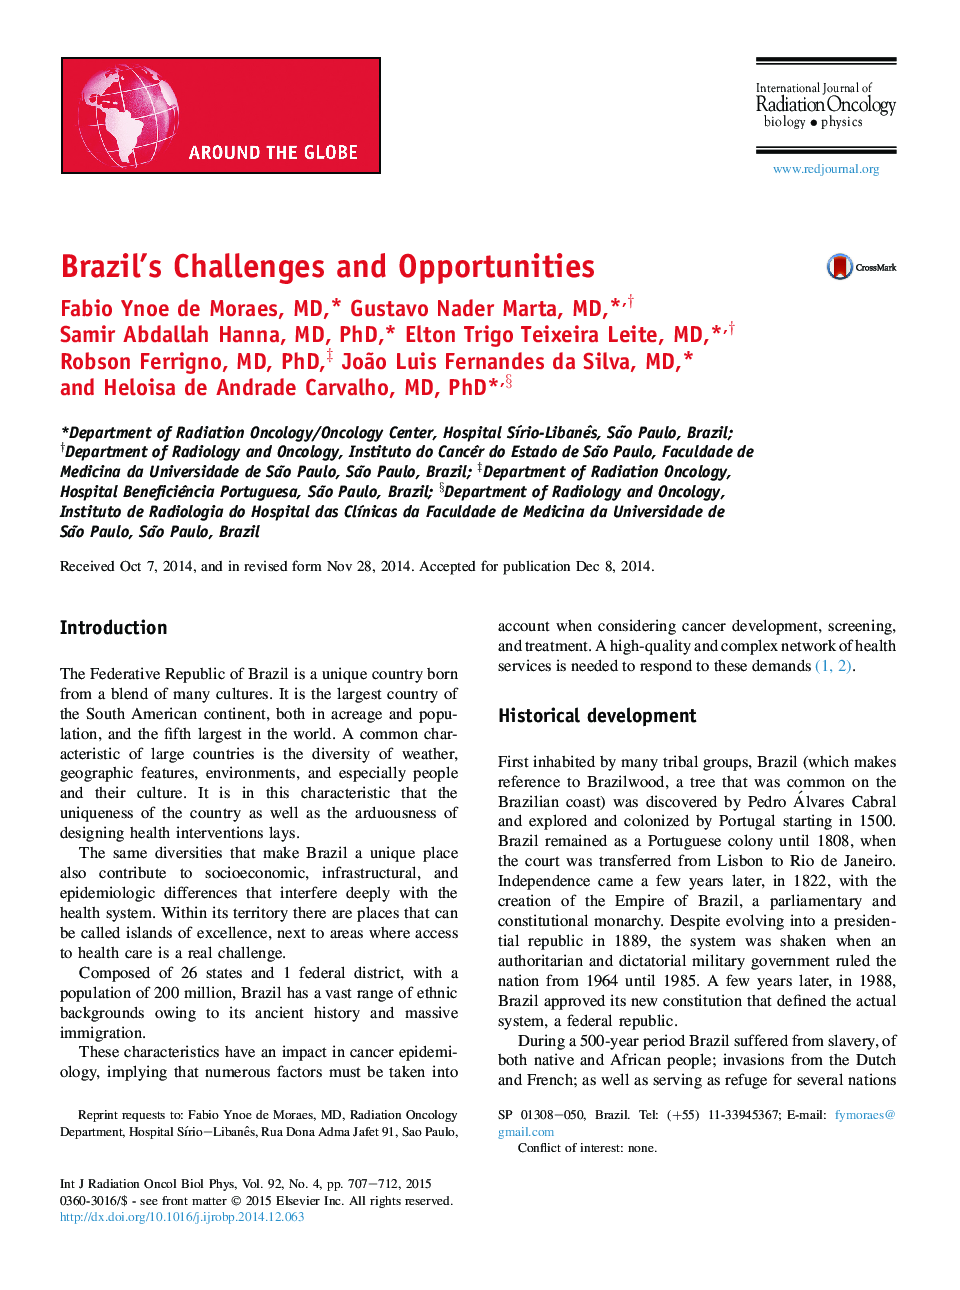 Brazil's Challenges and Opportunities